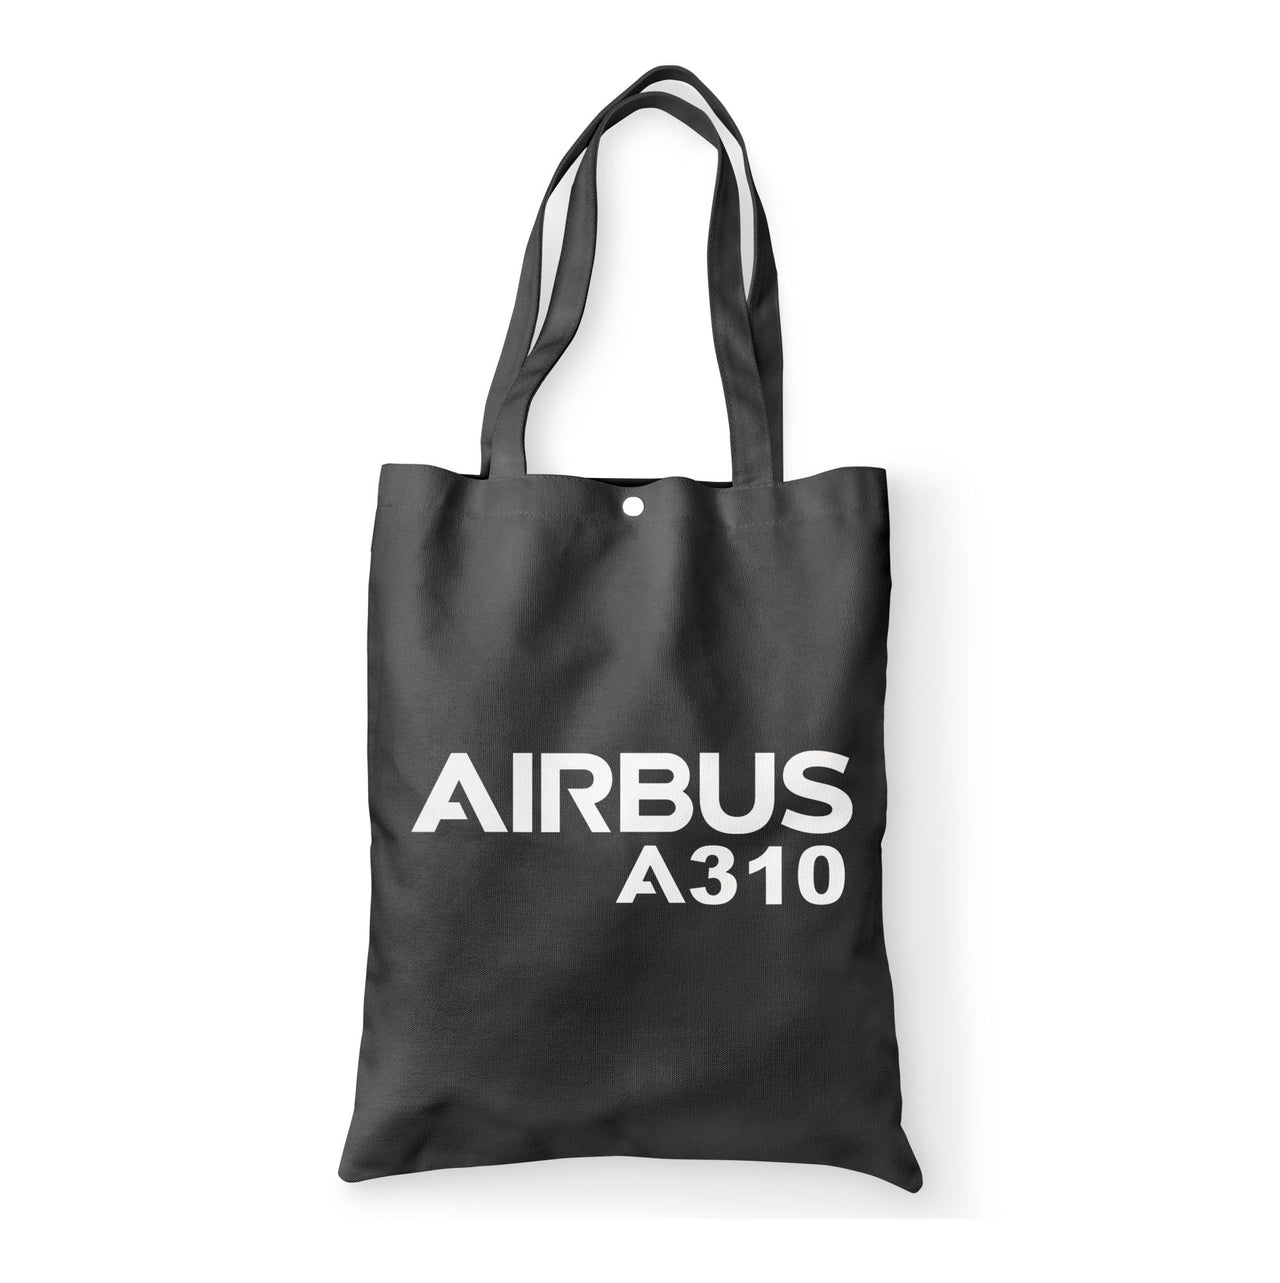 Airbus A310 & Text Designed Tote Bags